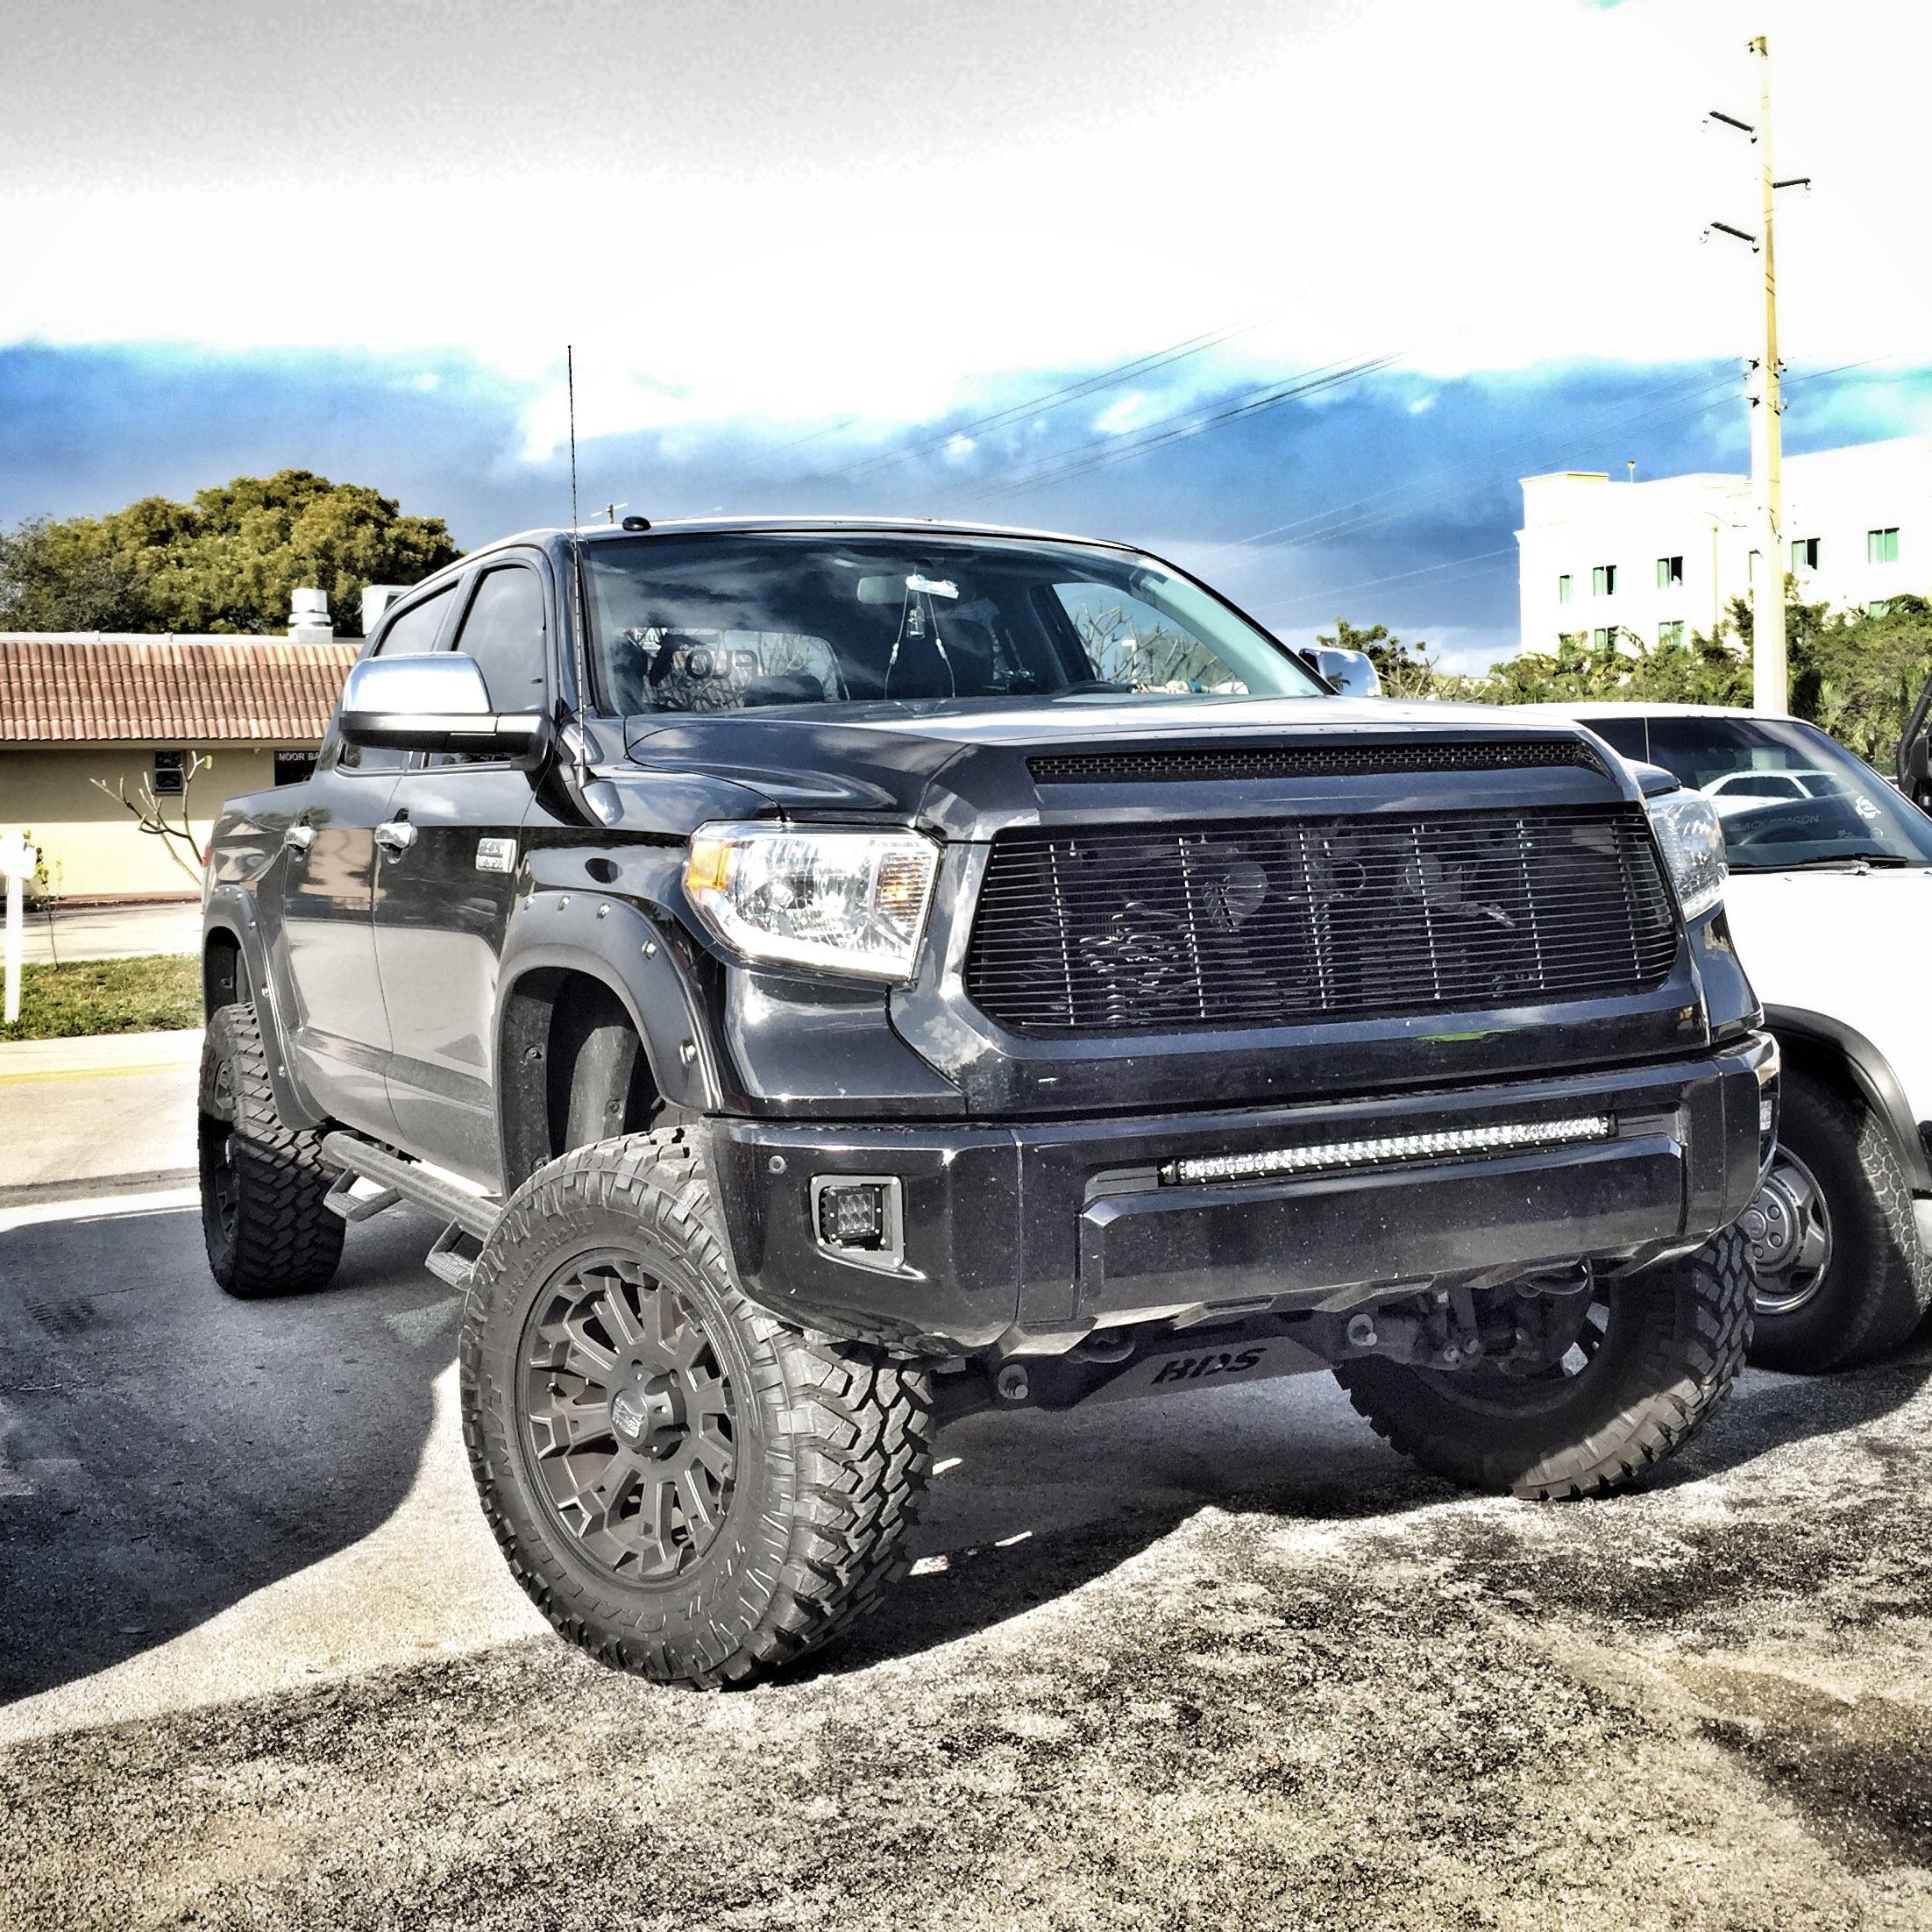 2013 Toyota Tundra With 7 Bds Suspension Lift Lifted Trucks